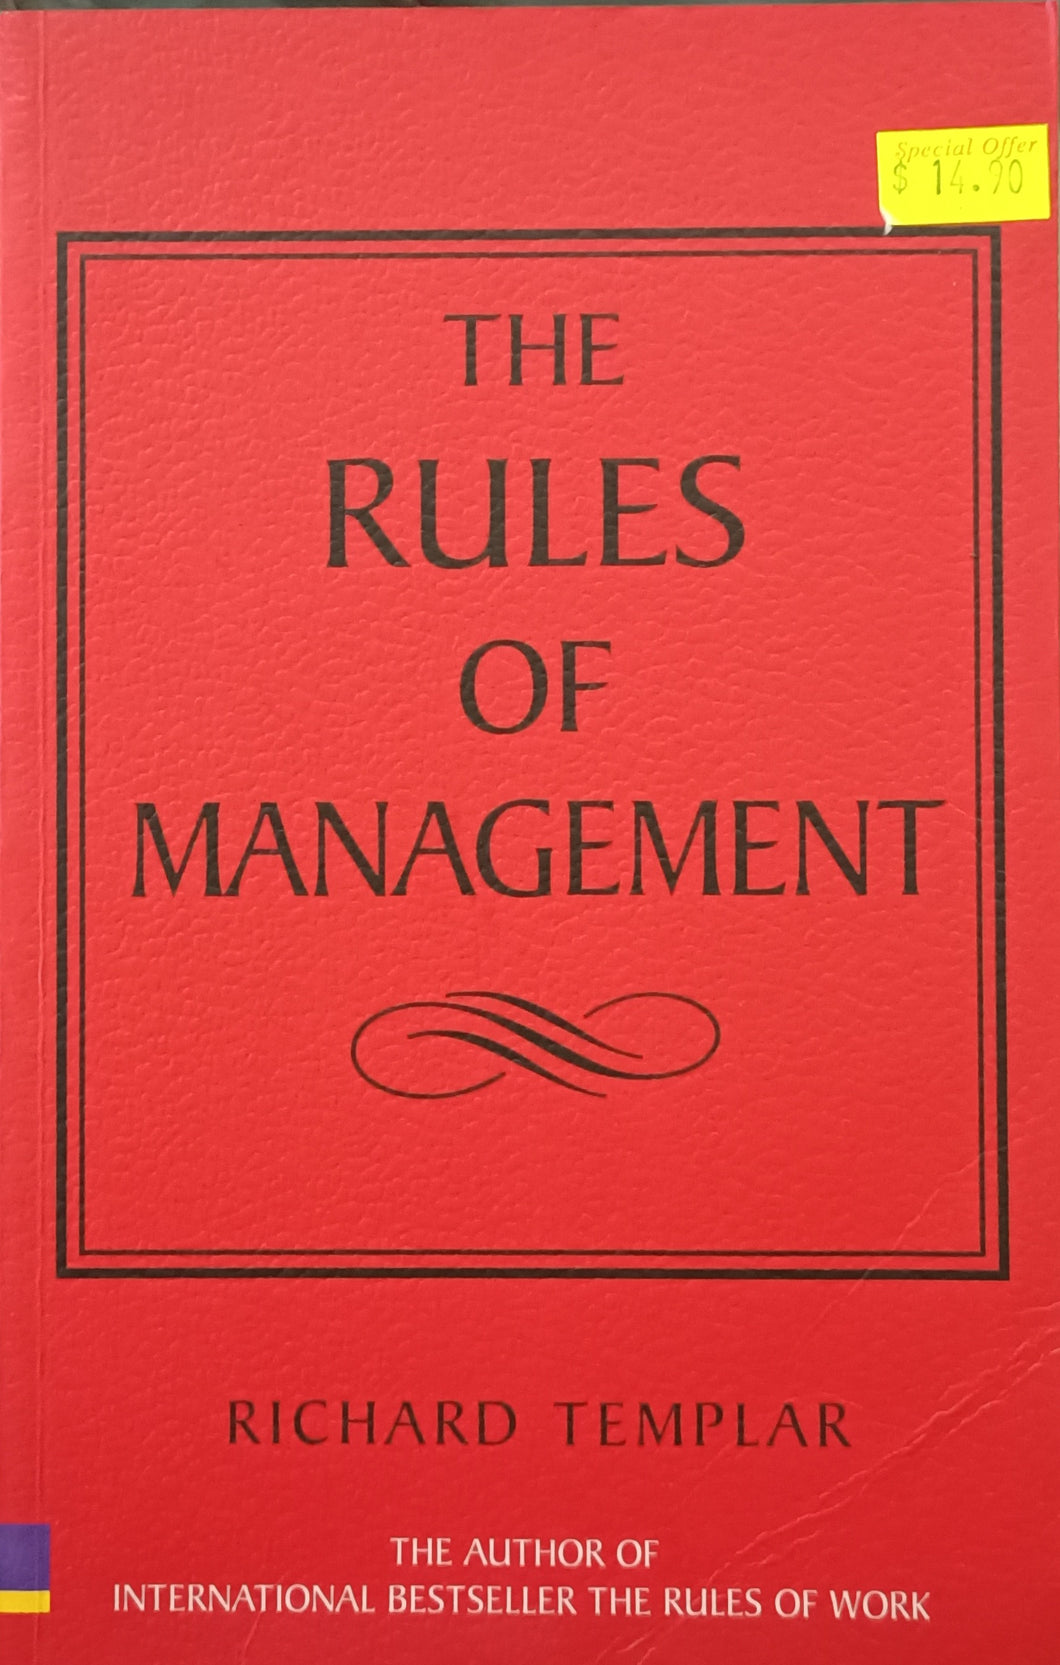 The Rules Of Management - Richard Templar